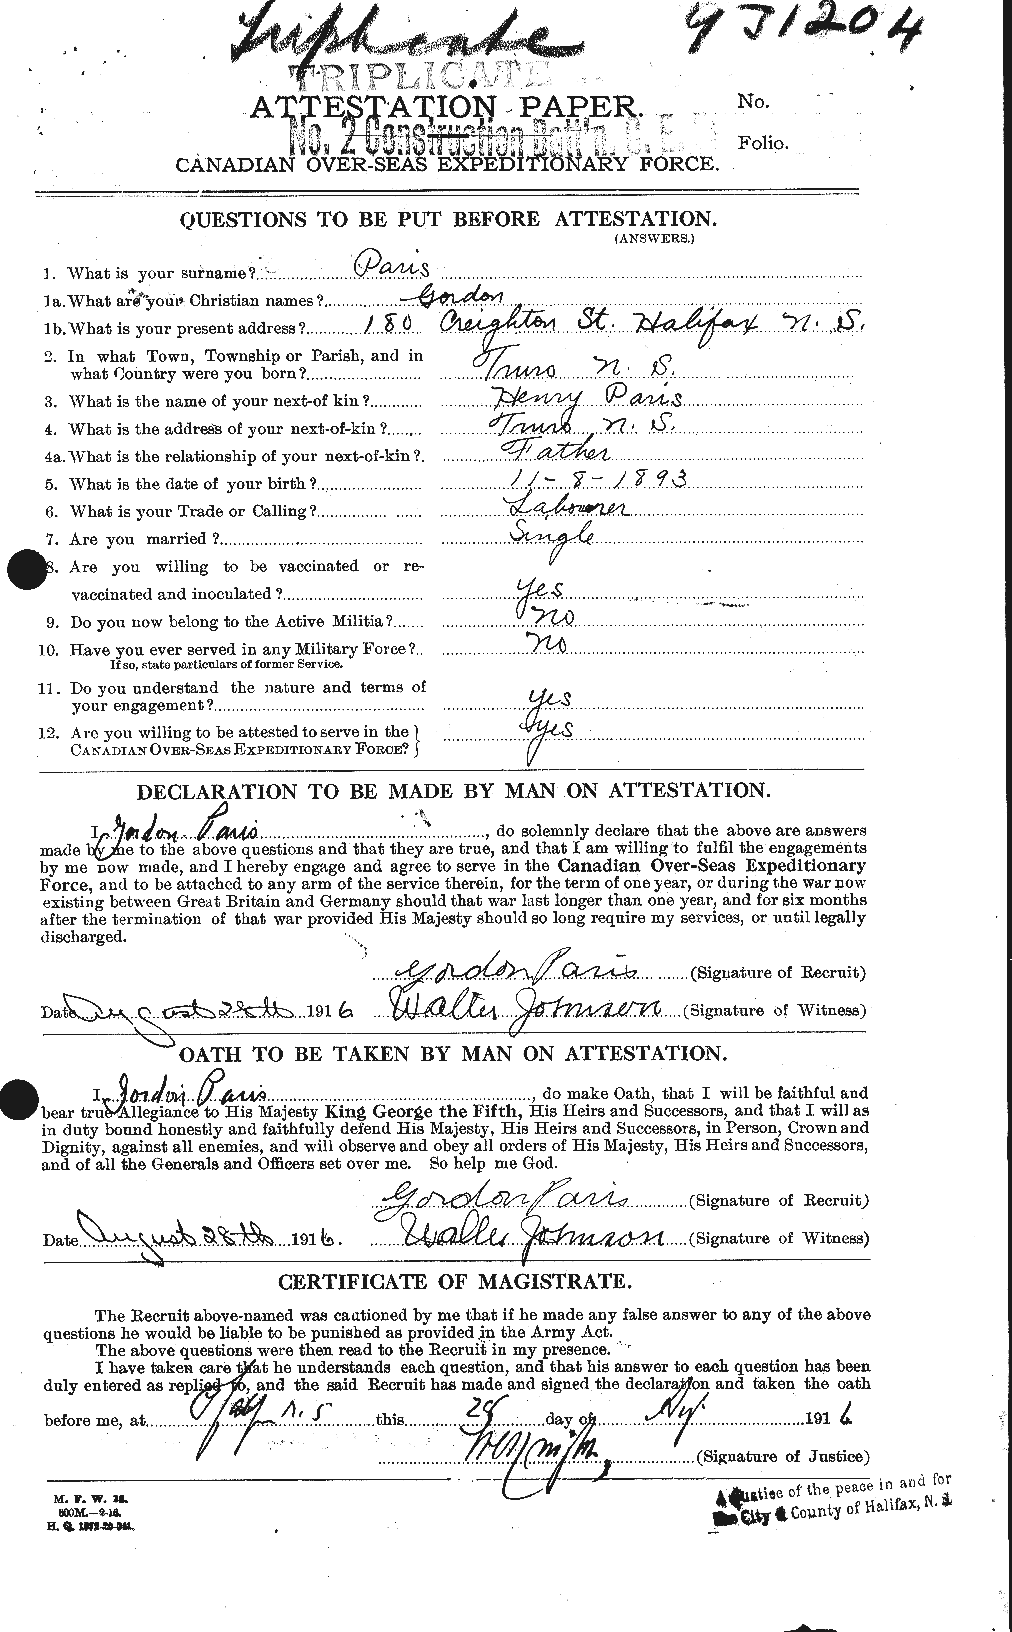 Personnel Records of the First World War - CEF 564595a